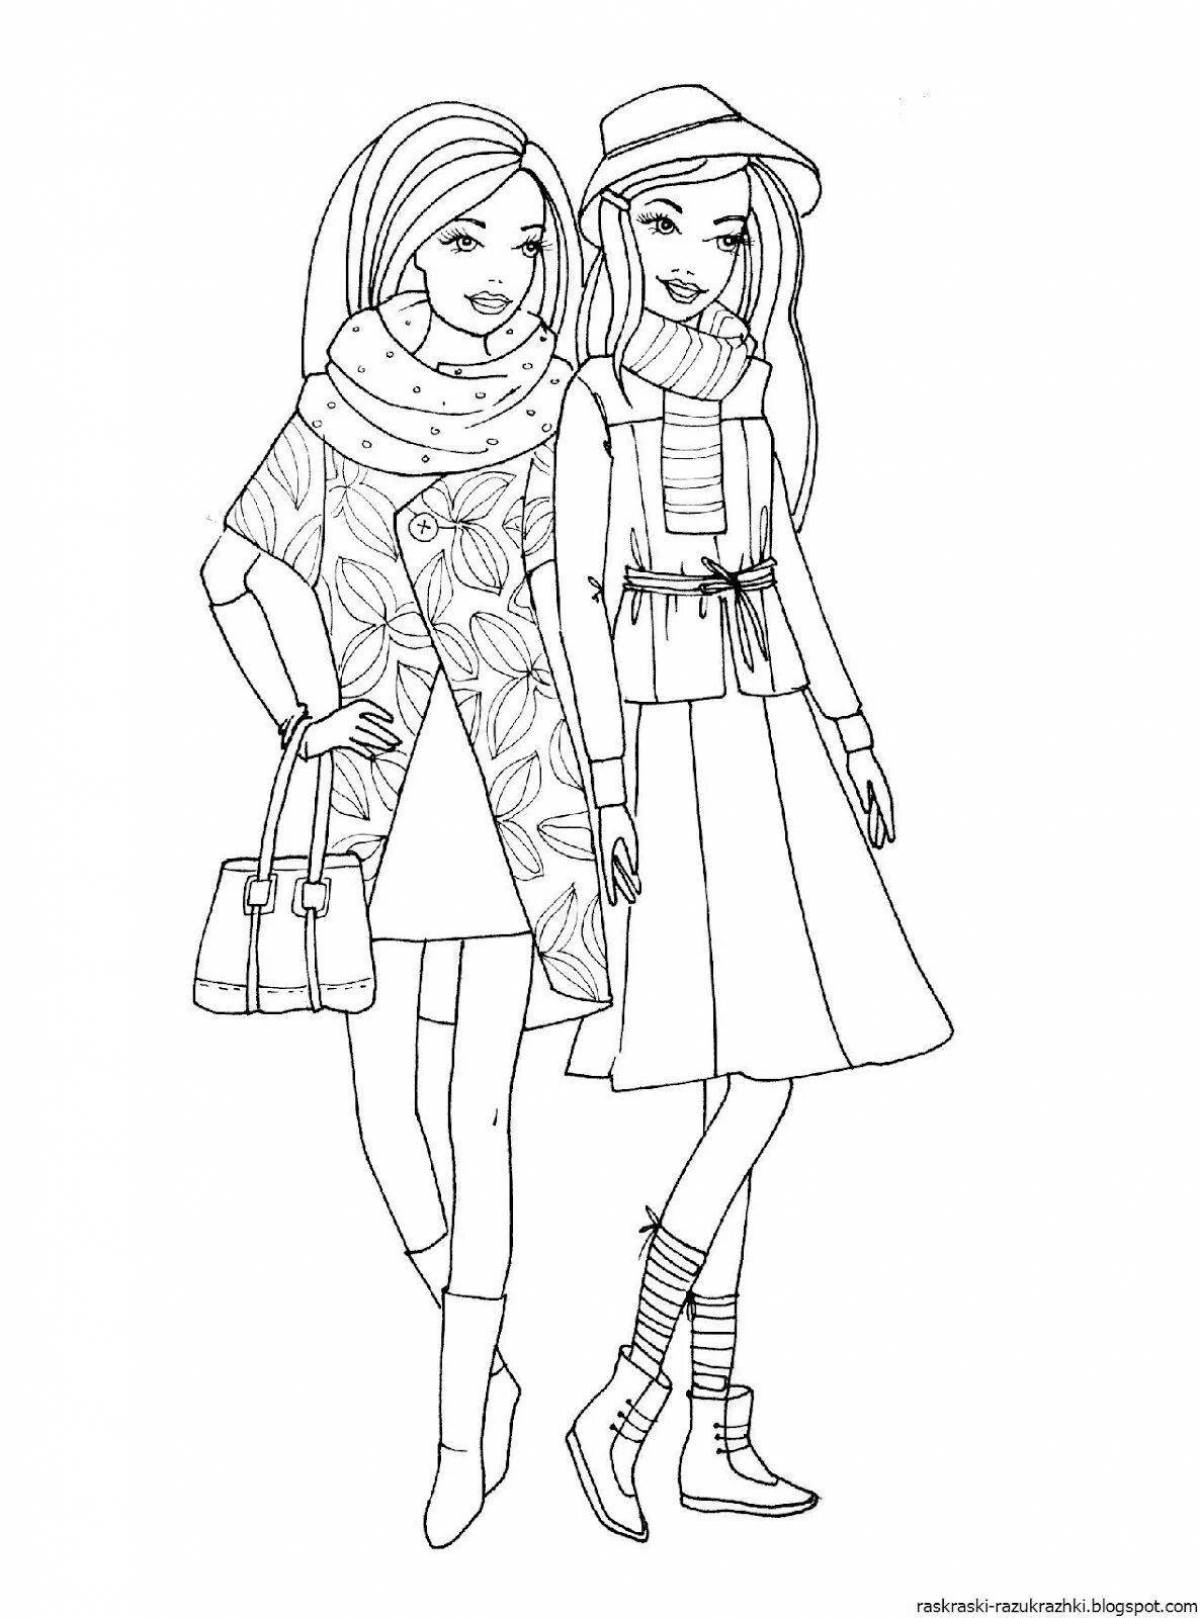 Coloring page brave fashionista